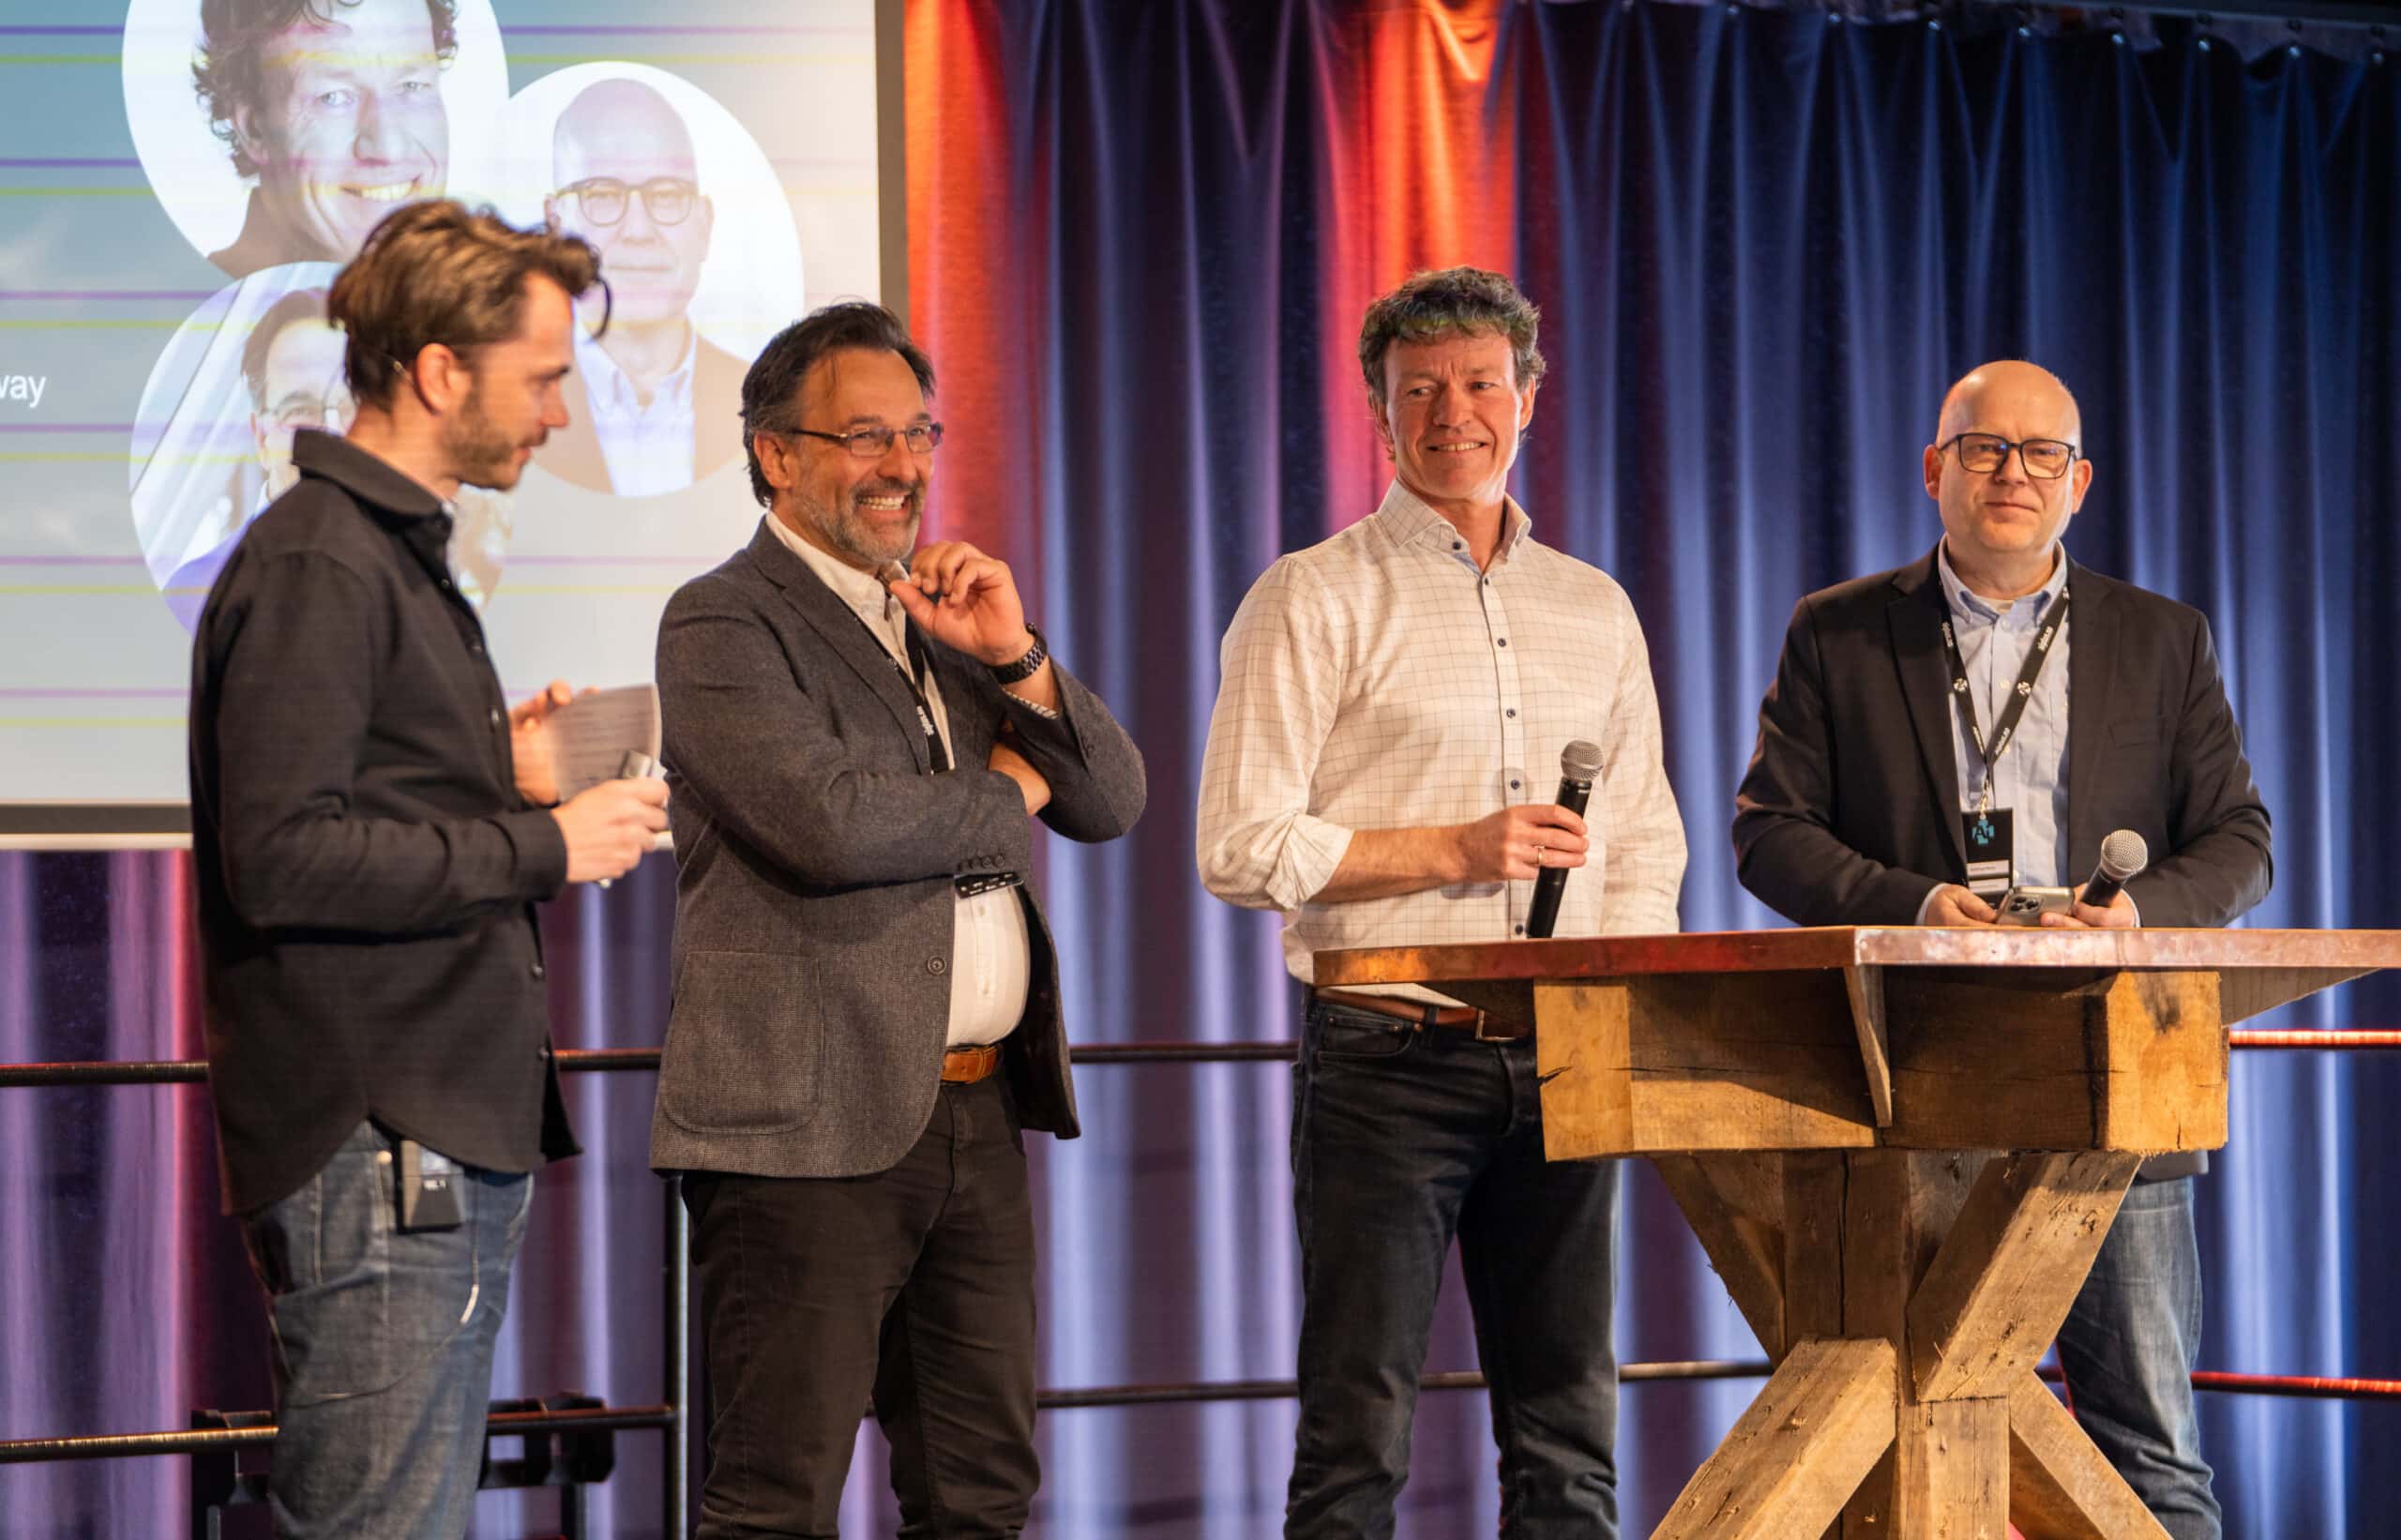 Jo Roald from Abelia, (left), Eirik Andreassen from Digital Norway, Trym Holter from Silo AI and Kenth Engø-Monsen from Smart Innovation Norway. PHOTO: Stein Johnsen, ContentVideo